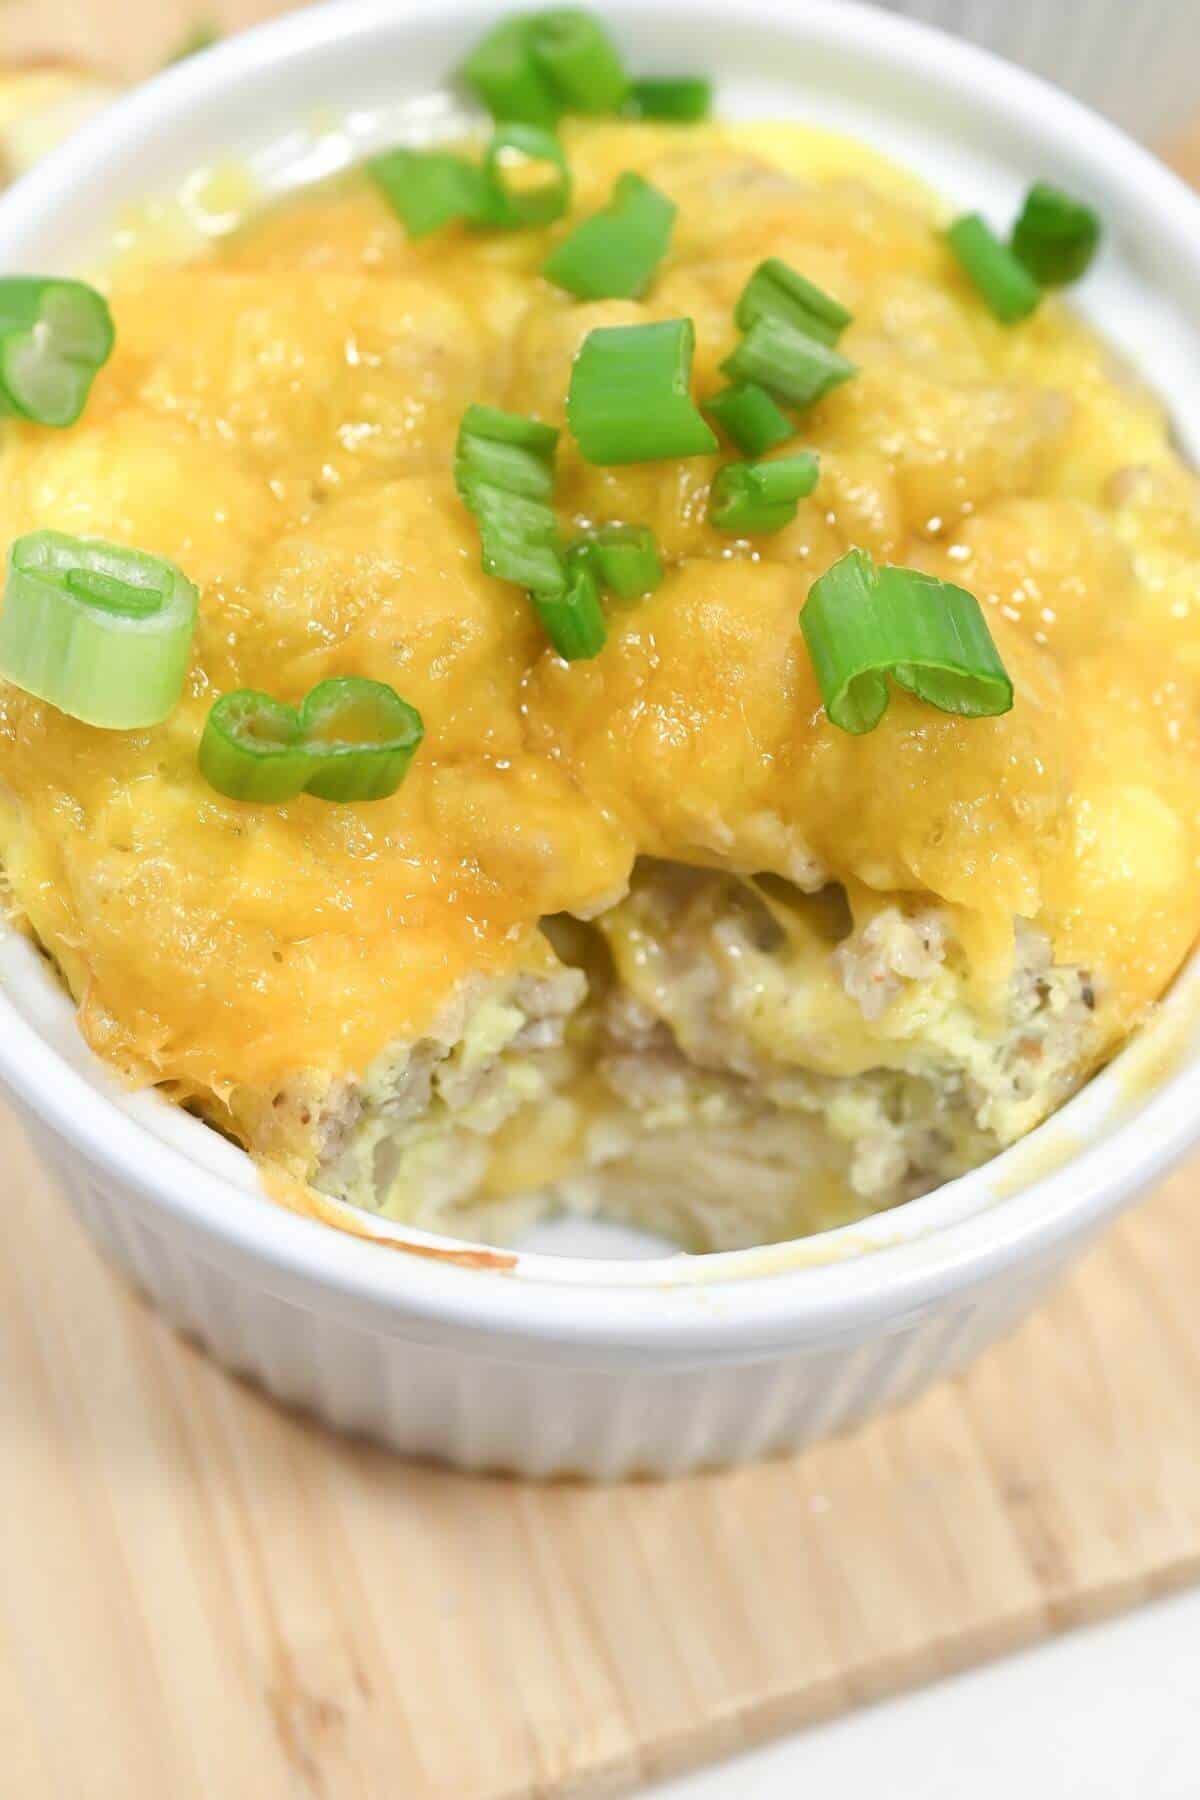 Baked breakfast casserole topped with melted cheese and garnished with green onions.